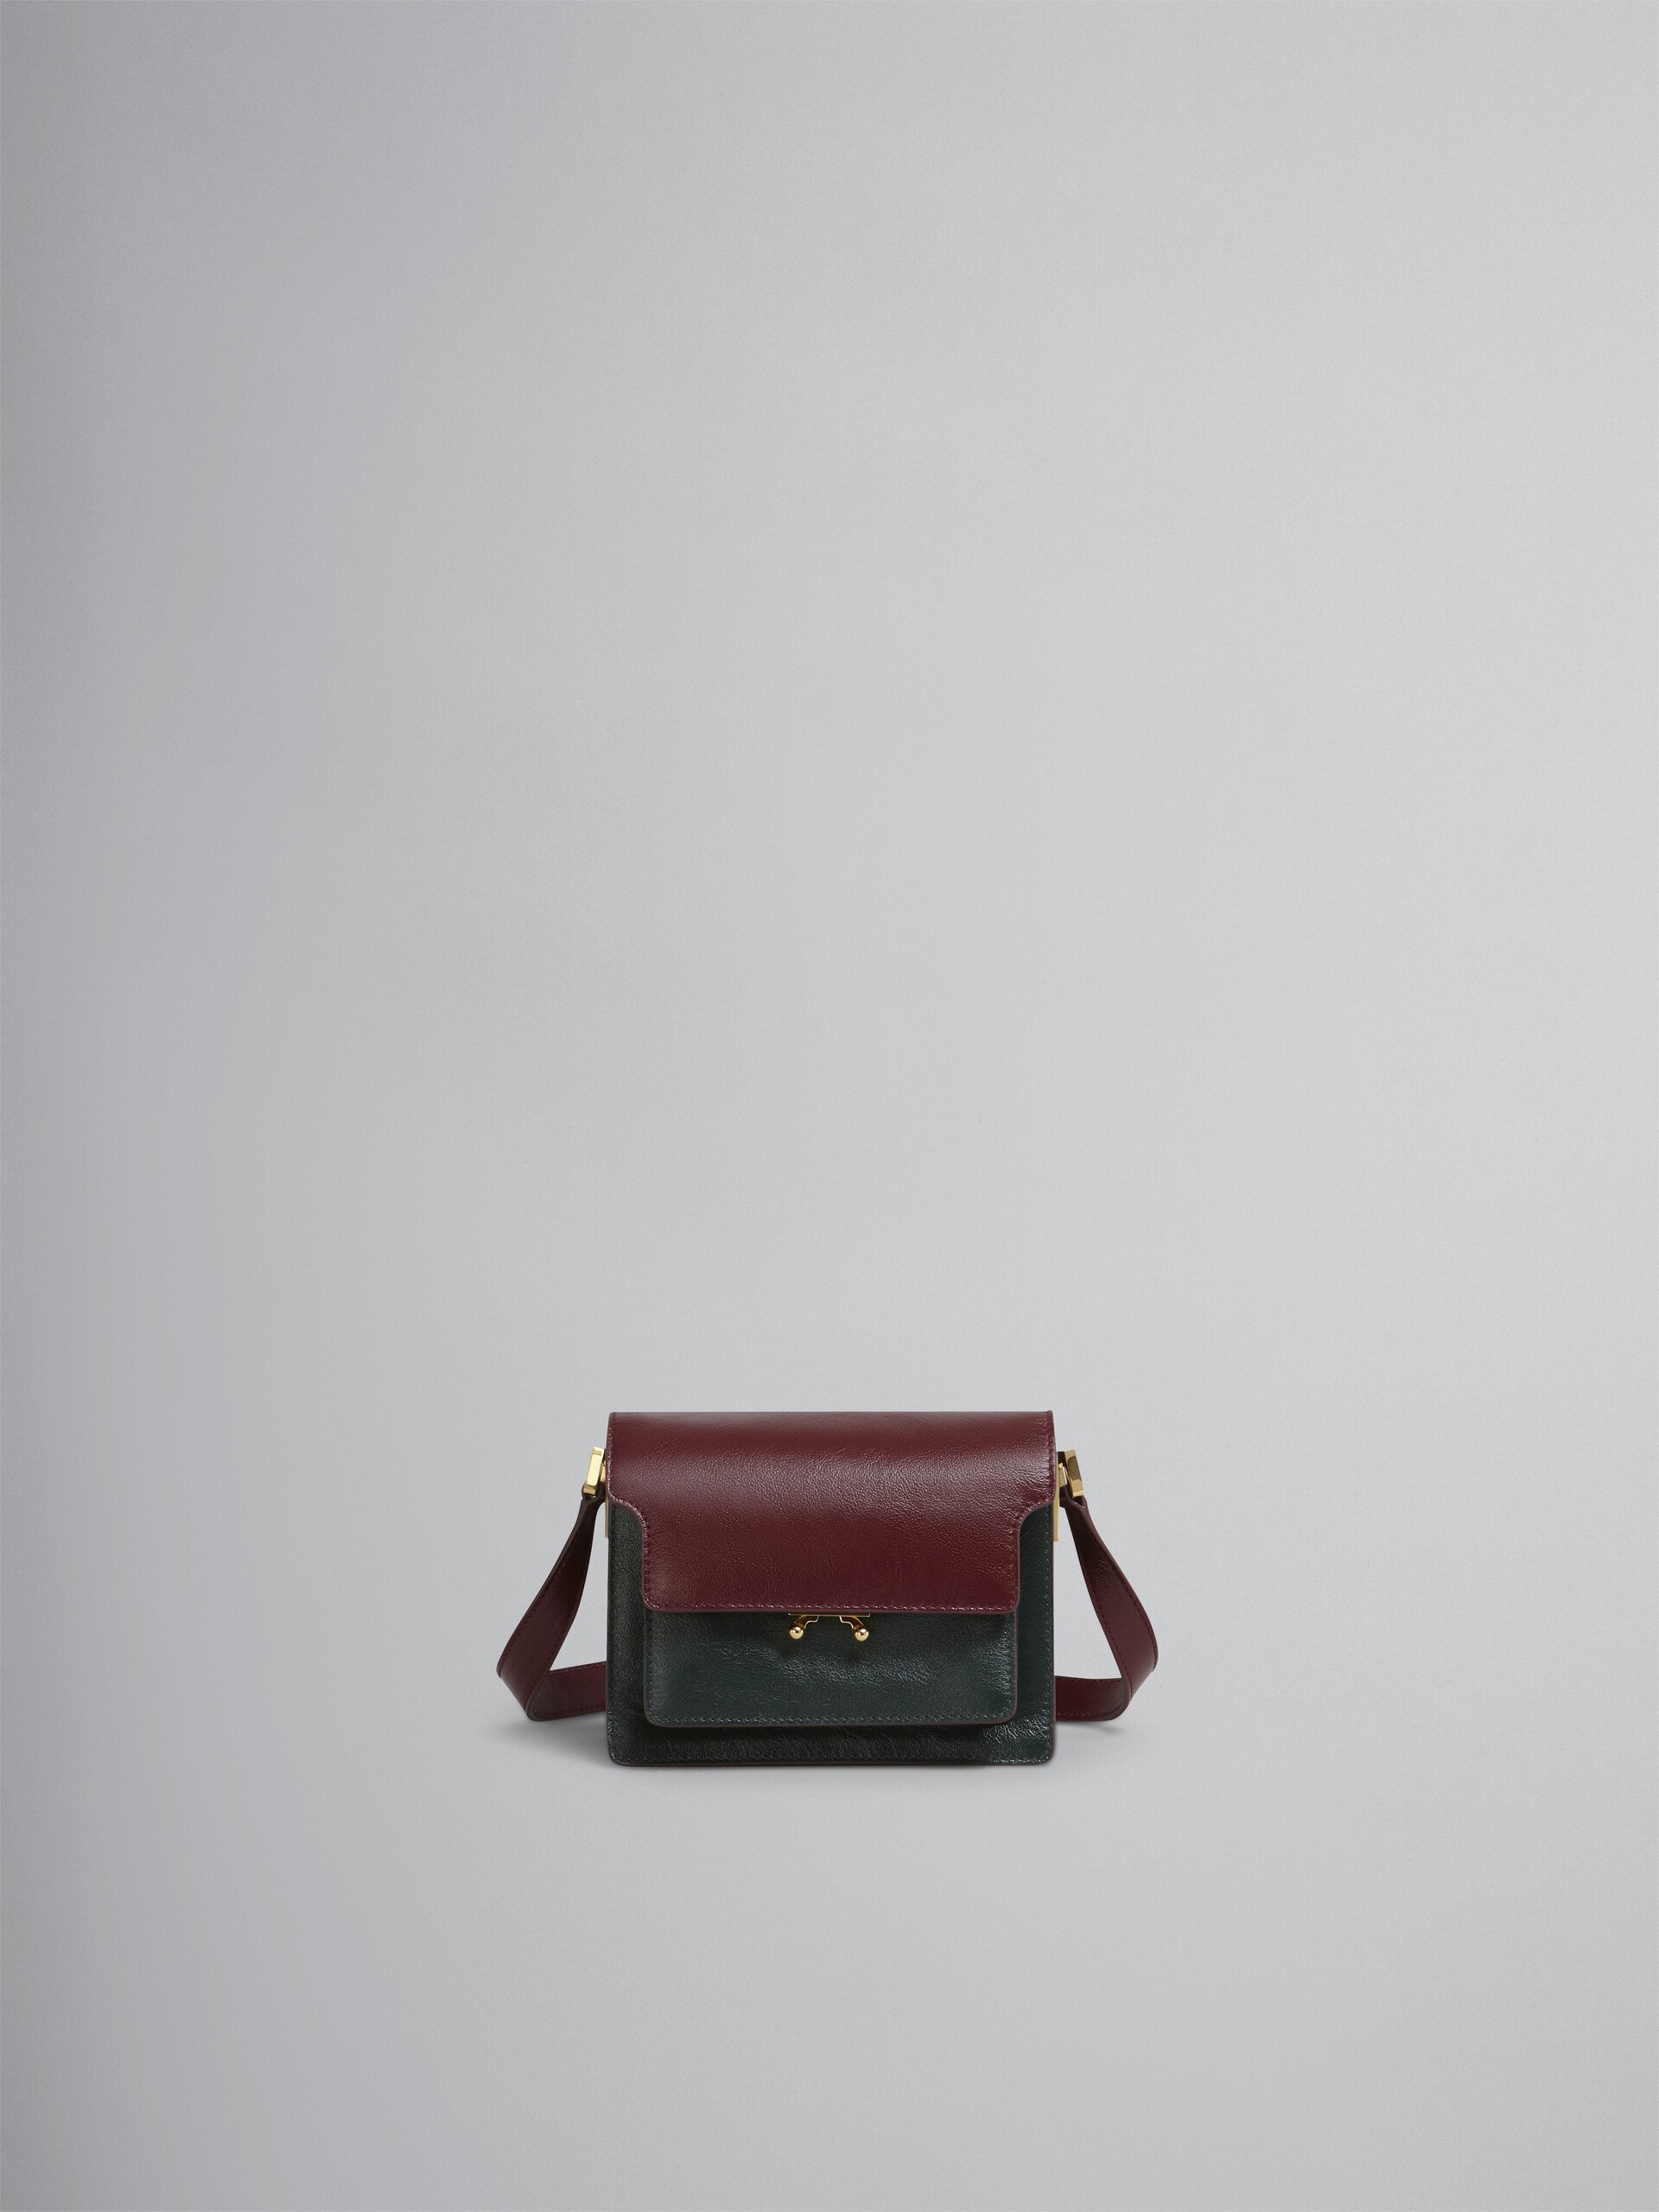 TRUNK SOFT bag in green and burgundy tumbled calf - Shoulder Bags - Image 1